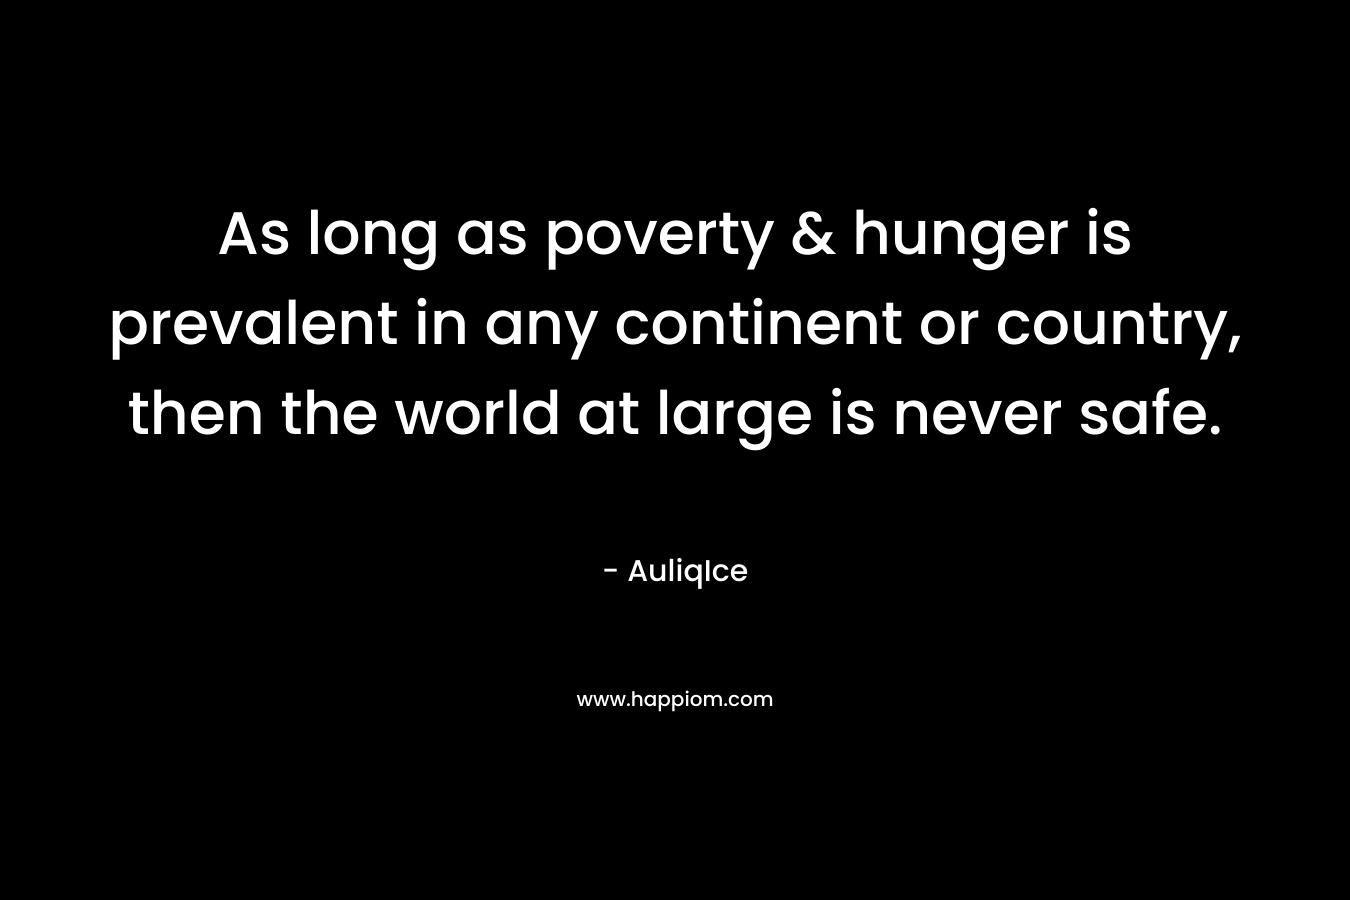 As long as poverty & hunger is prevalent in any continent or country, then the world at large is never safe.